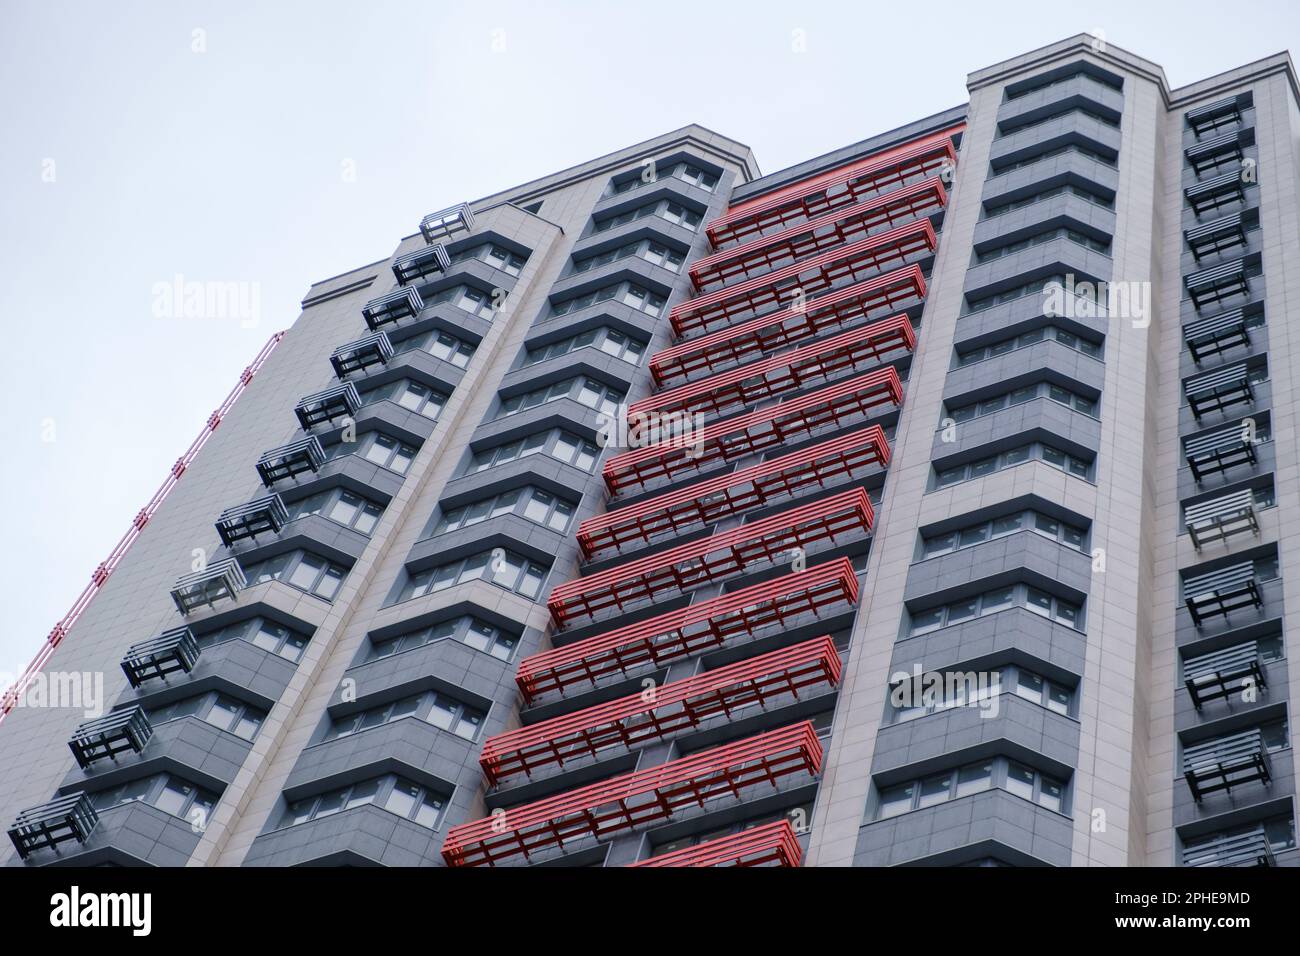 High-rise apartment building with balconies. Modern high-rise building with balconies, set against clear sky. Shot from a low angle, looking up towards the top of the building. Stock Photo